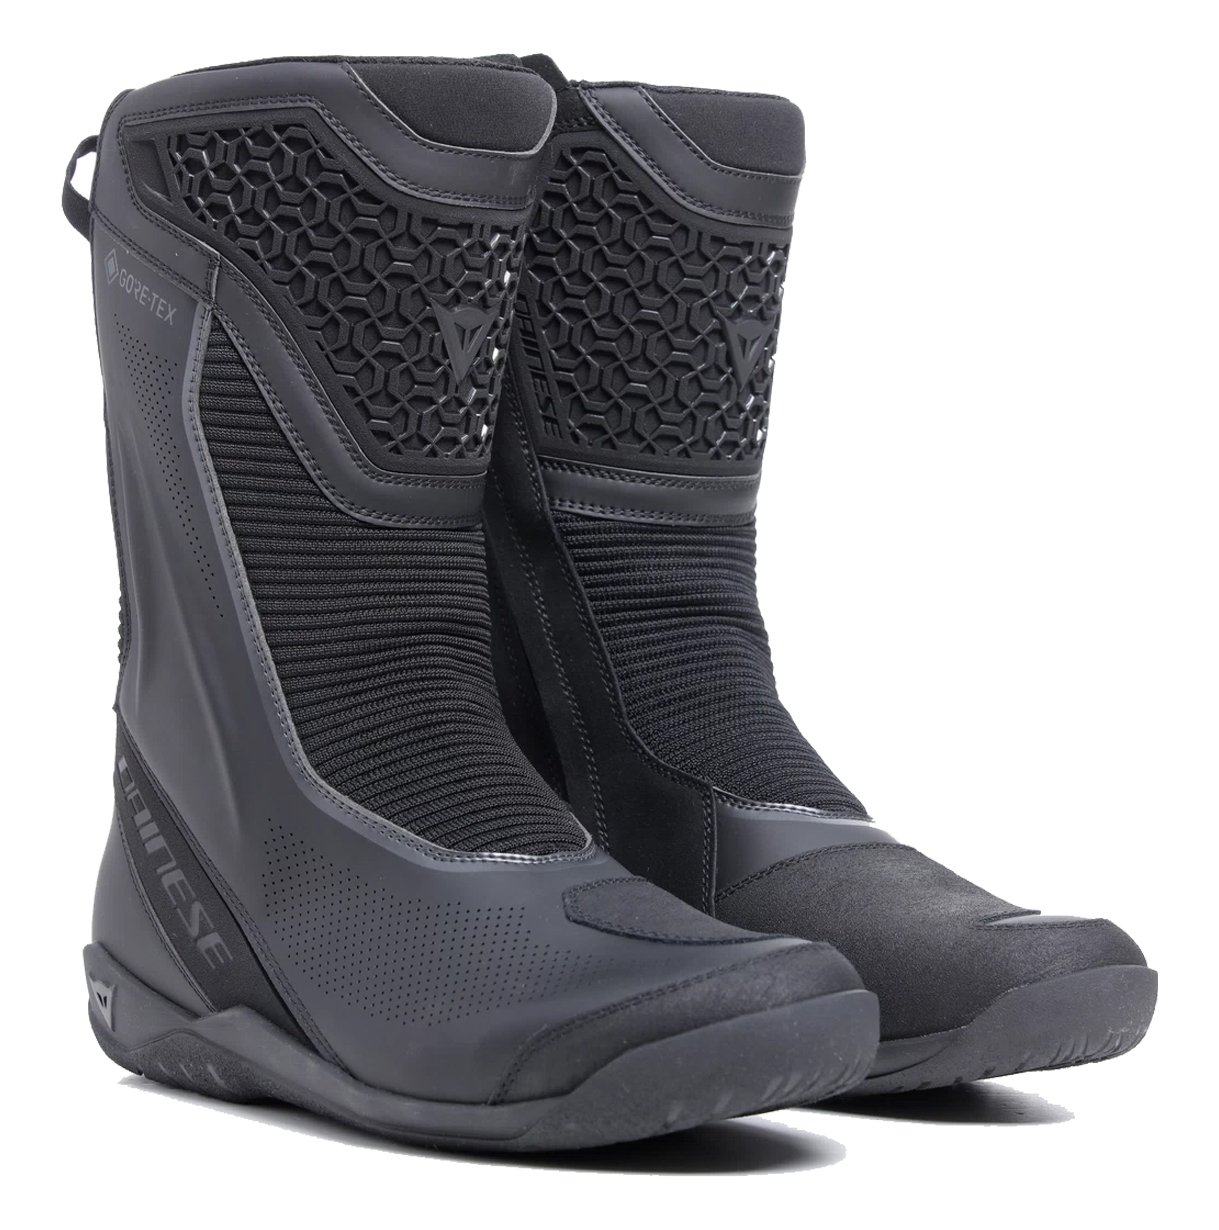 Image of Dainese Freeland 2 Gore-Tex Boots Black Size 39 ID 8051019692580